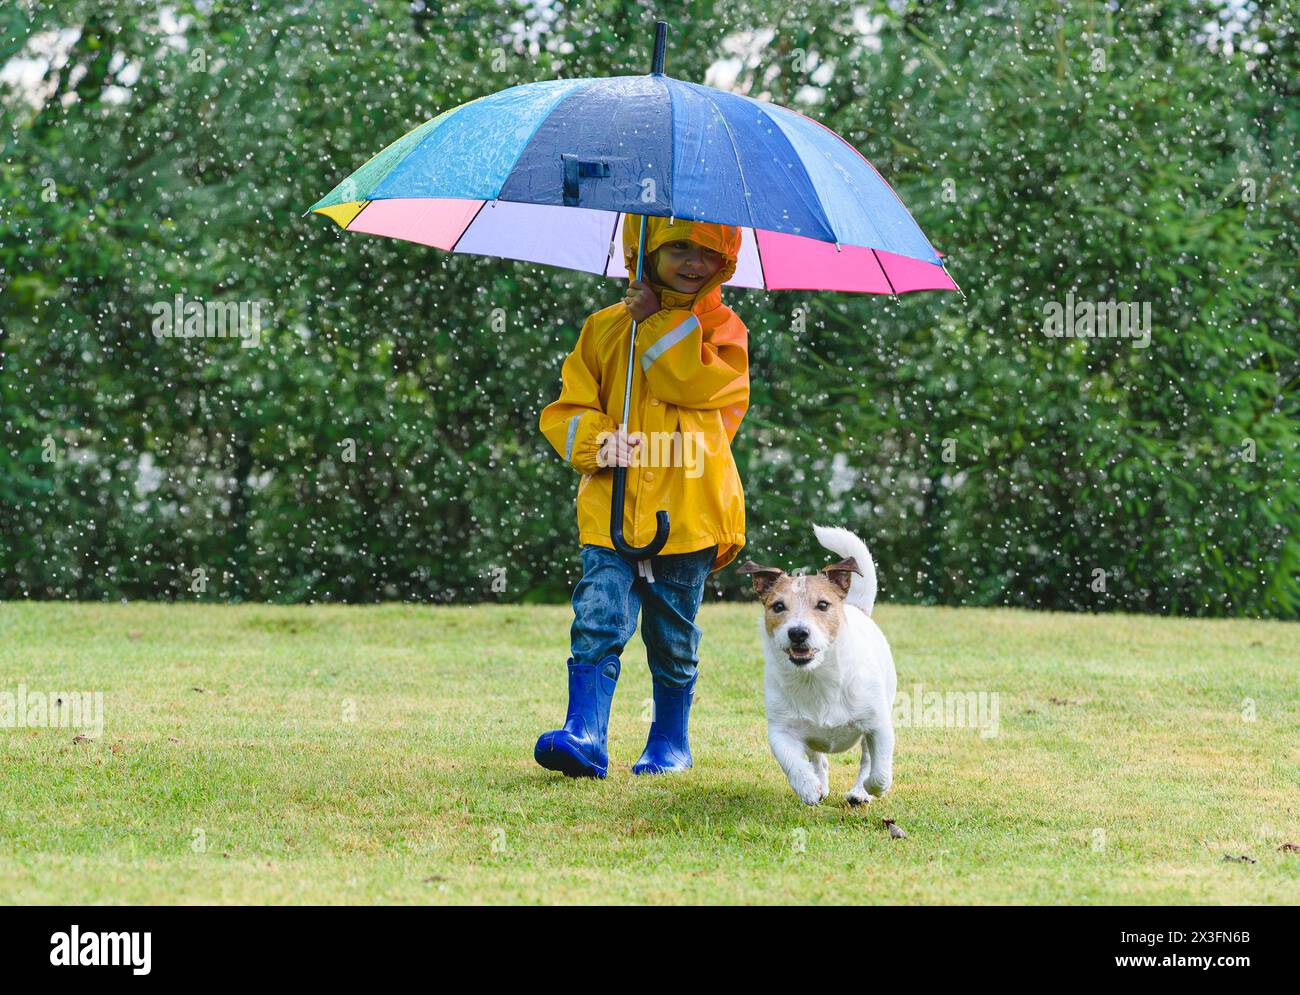 Kid in raincoat under umbrella and her dog playing on grass lawn during spring rain Stock Photo